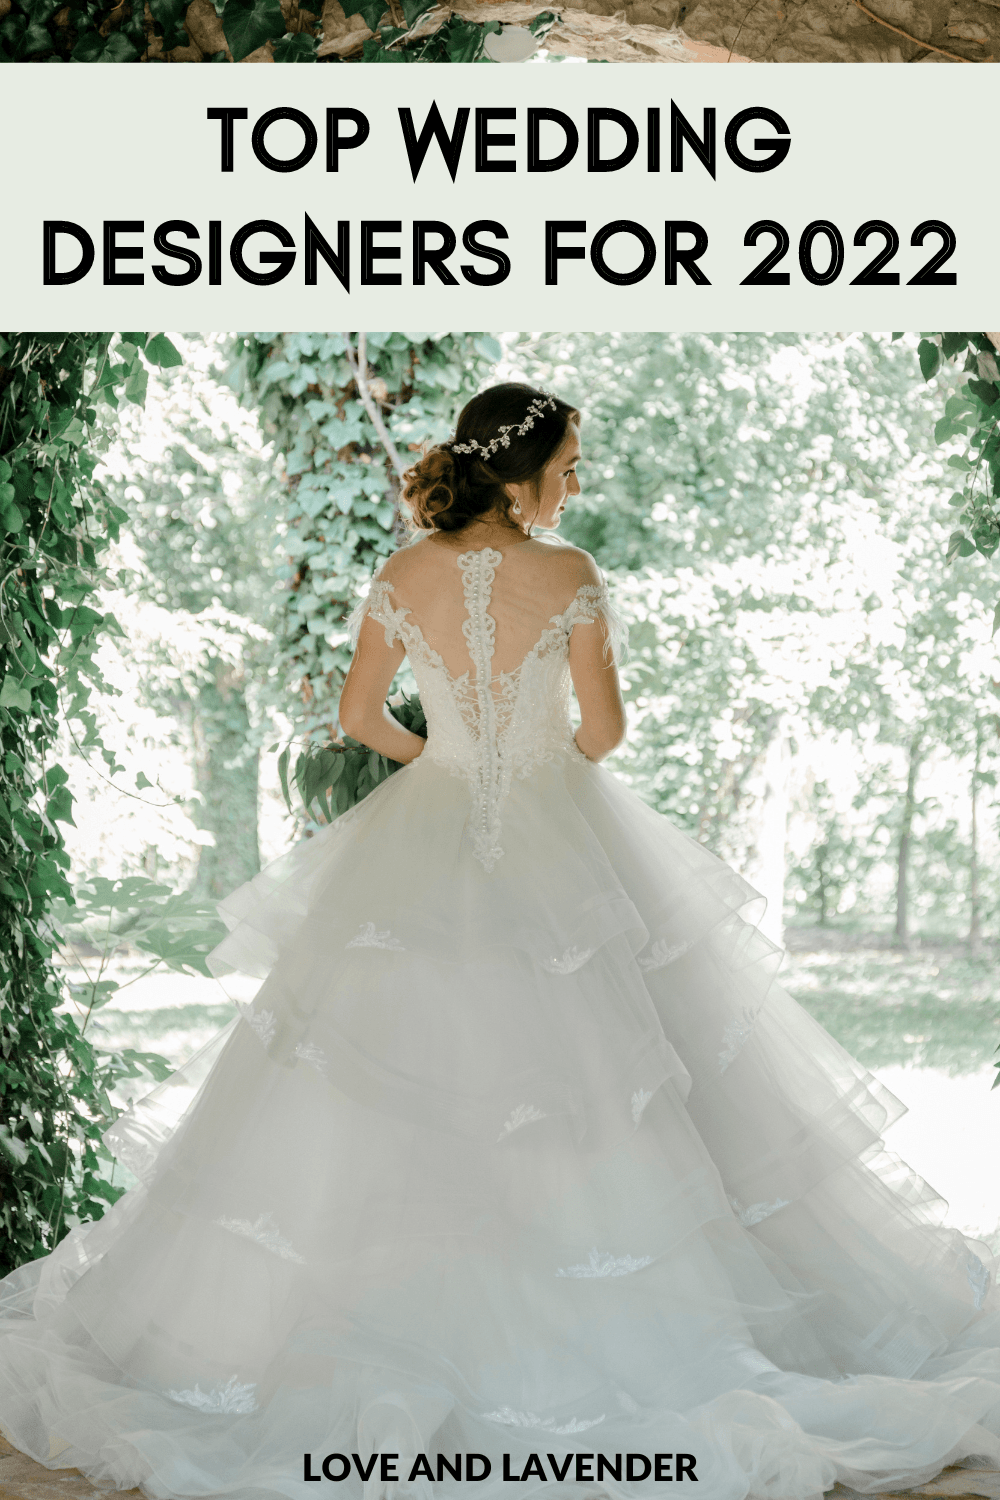 The Ultimate List of Wedding Gown Designers [2022 Edition]